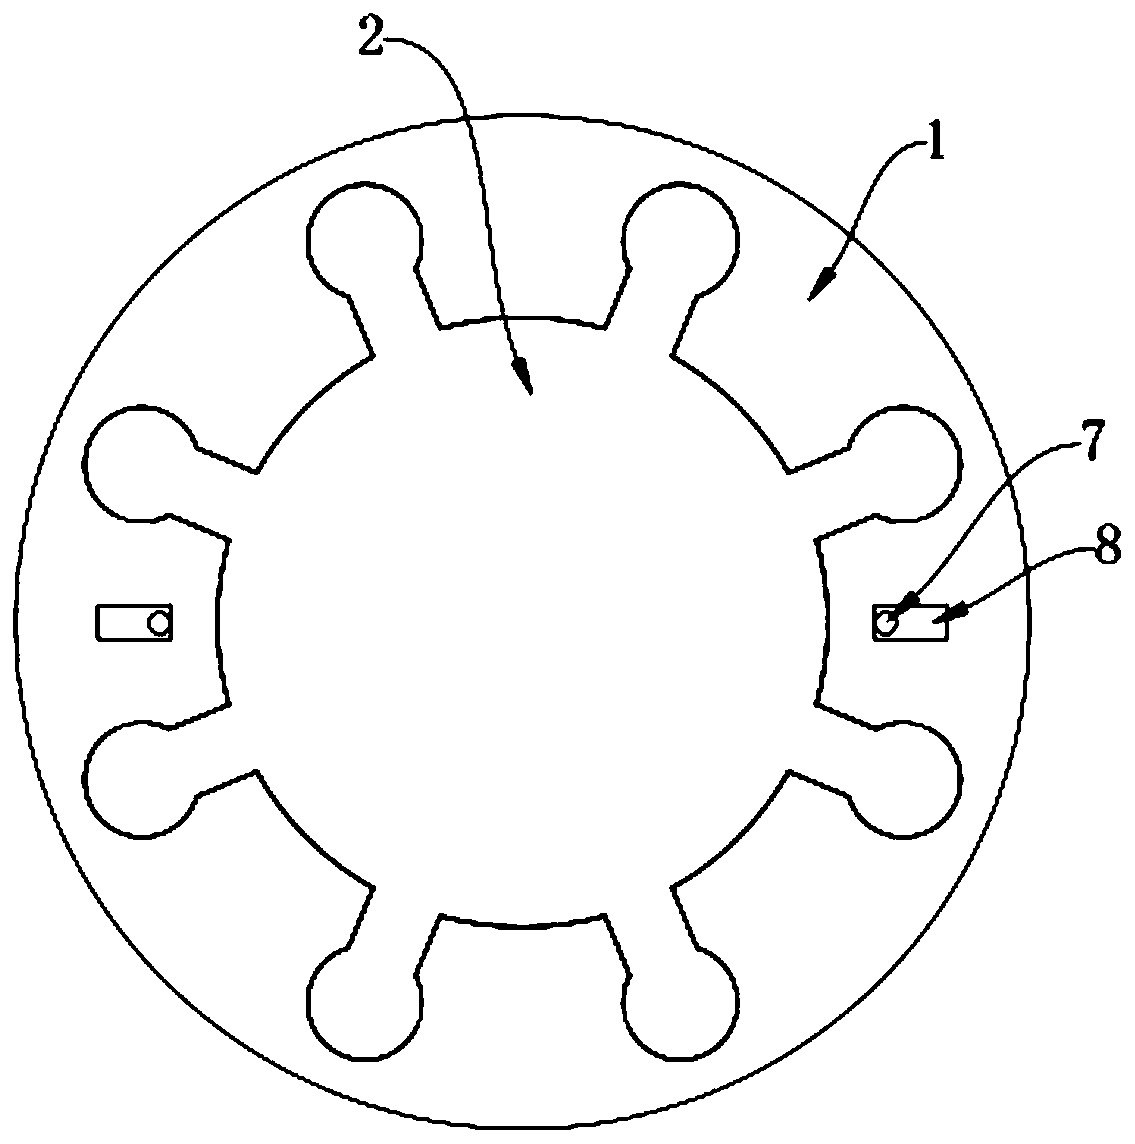 A connection structure for motor output shaft and rotating shaft